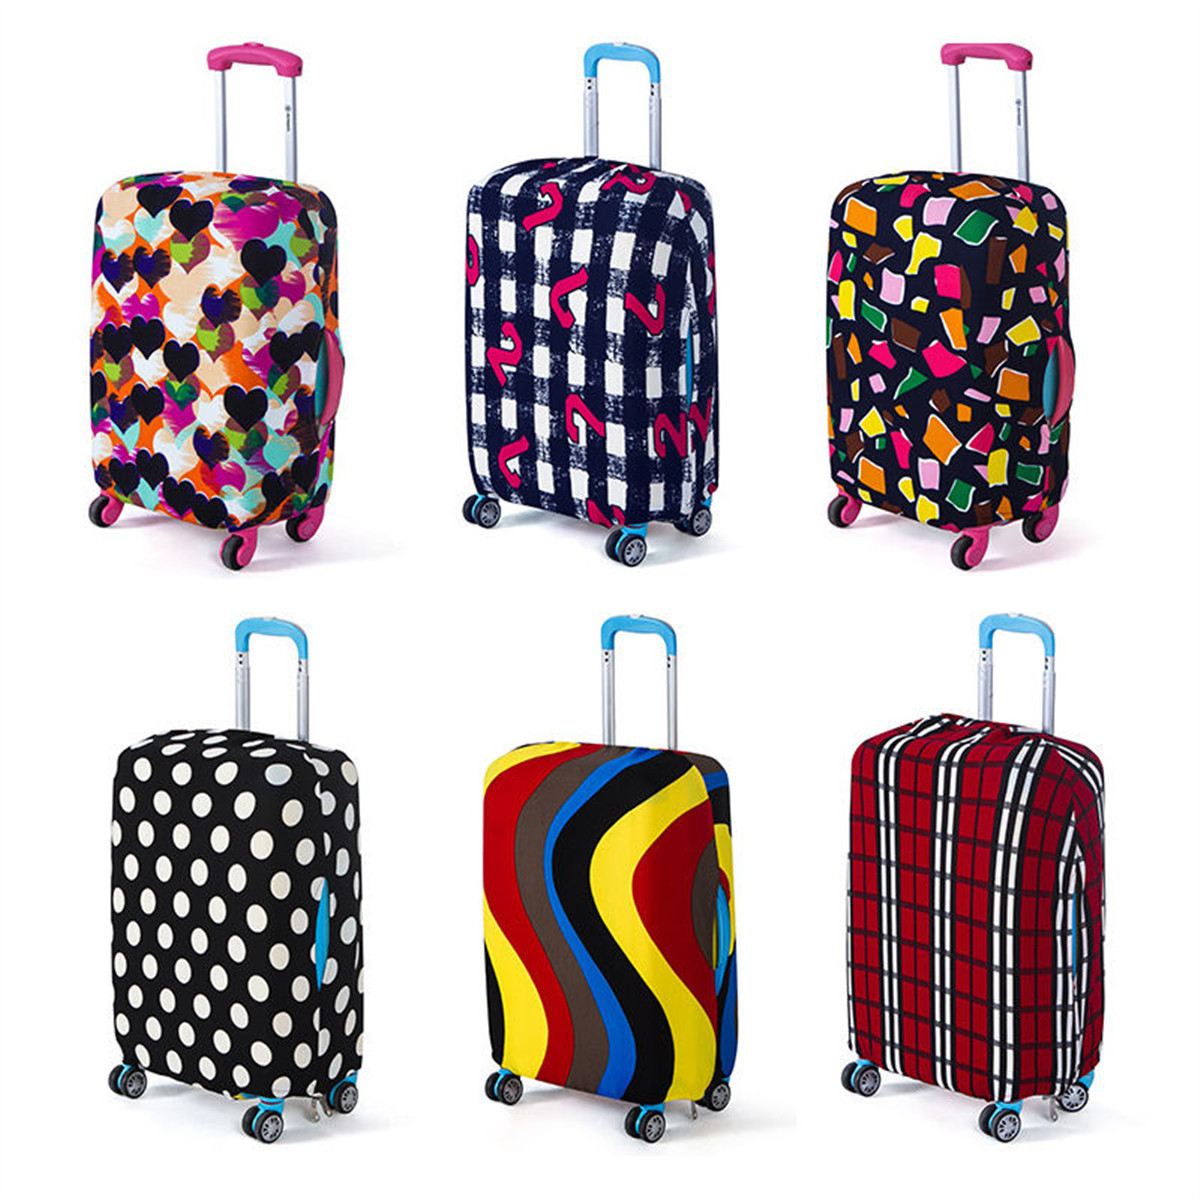 26-28" Size L Travel Luggage Cover Protector